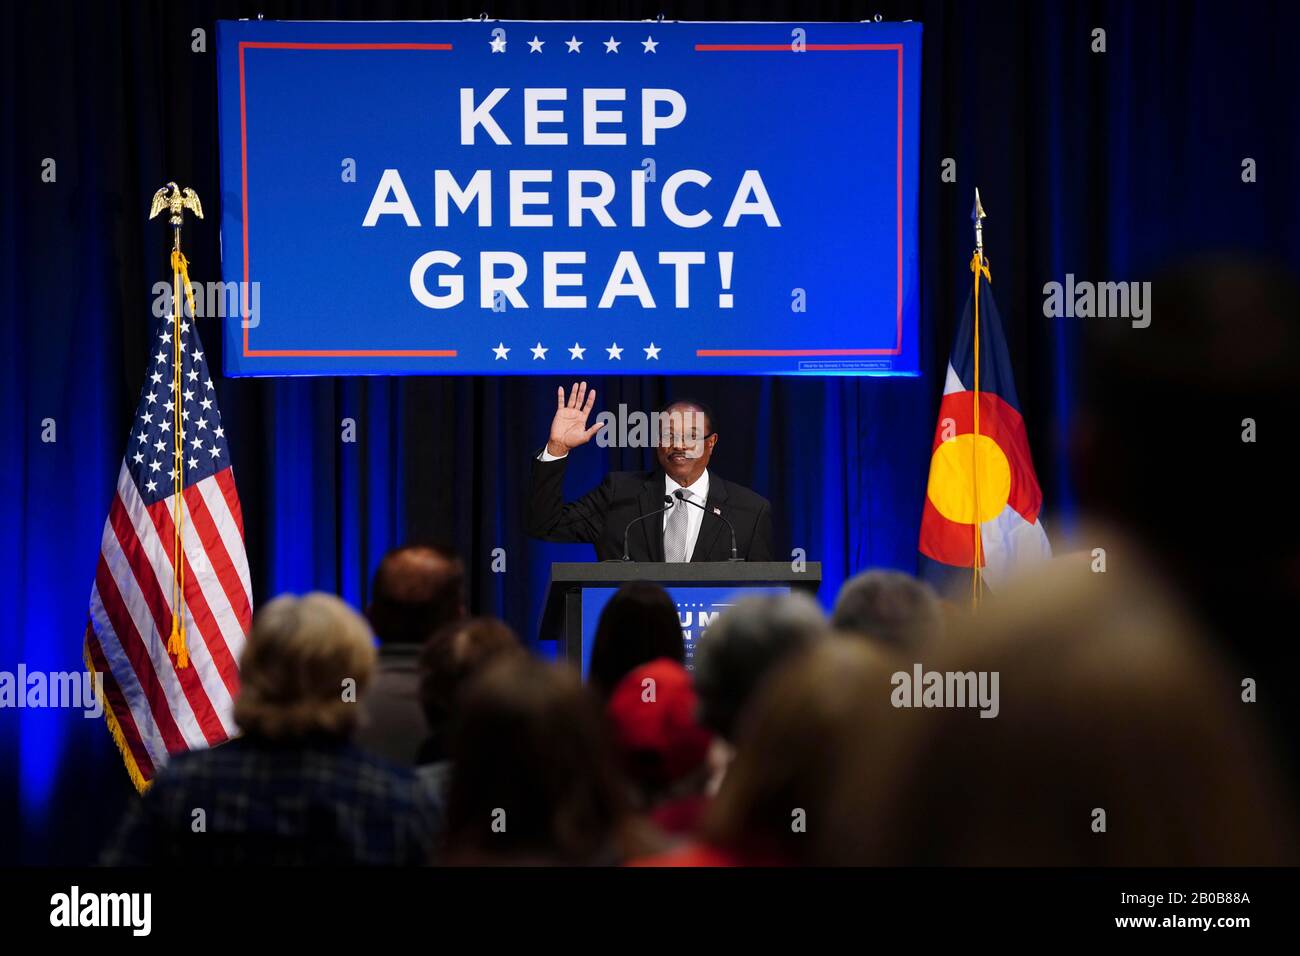 Aurora, United States. 19th Feb, 2020. A Trump supporter speaks to the crowd at Lara Trump's Keep America Great Again event at the Hyatt Regency Aurora-Denver on Wednesday, February 19th, 2020 in Aurora, Colorado. Credit: The Photo Access/Alamy Live News Stock Photo